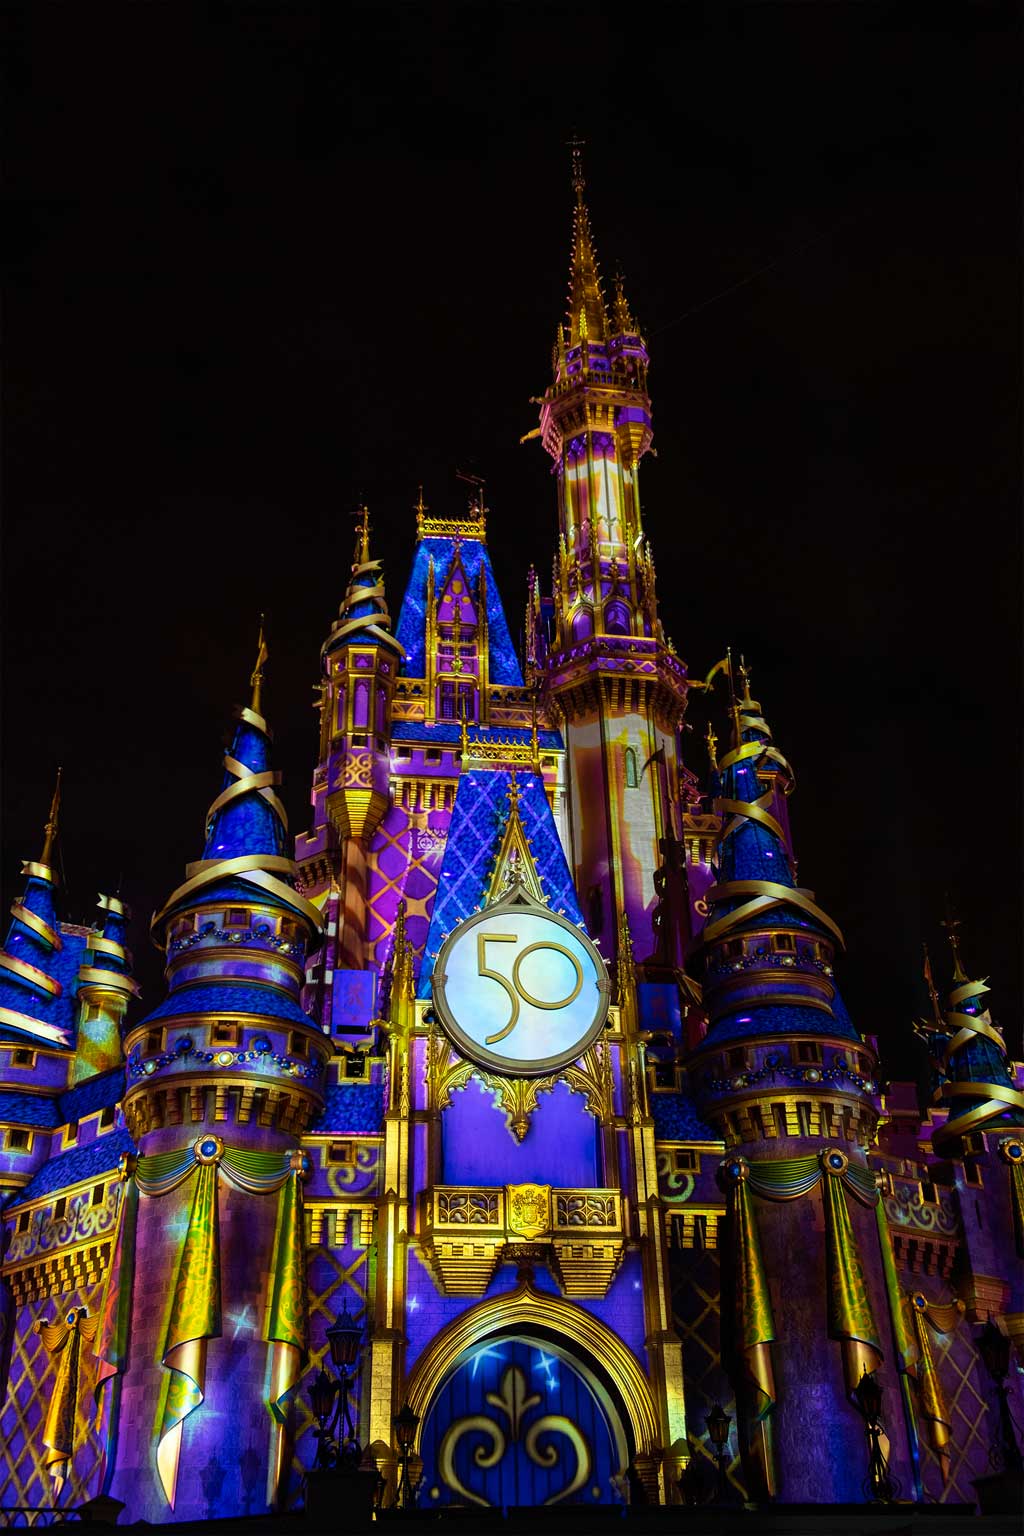 “Disney Enchantment” at Magic Kingdom Park, debuts Oct. 1, 2021, at Walt Disney World Resort in Lake Buena Vista, Fla. The new nighttime spectacular features stunning fireworks, powerful music, enhanced lighting and, for the first time, immersive projection effects that extend from Cinderella Castle down Main Street, U.S.A. (David Roark, photographer)